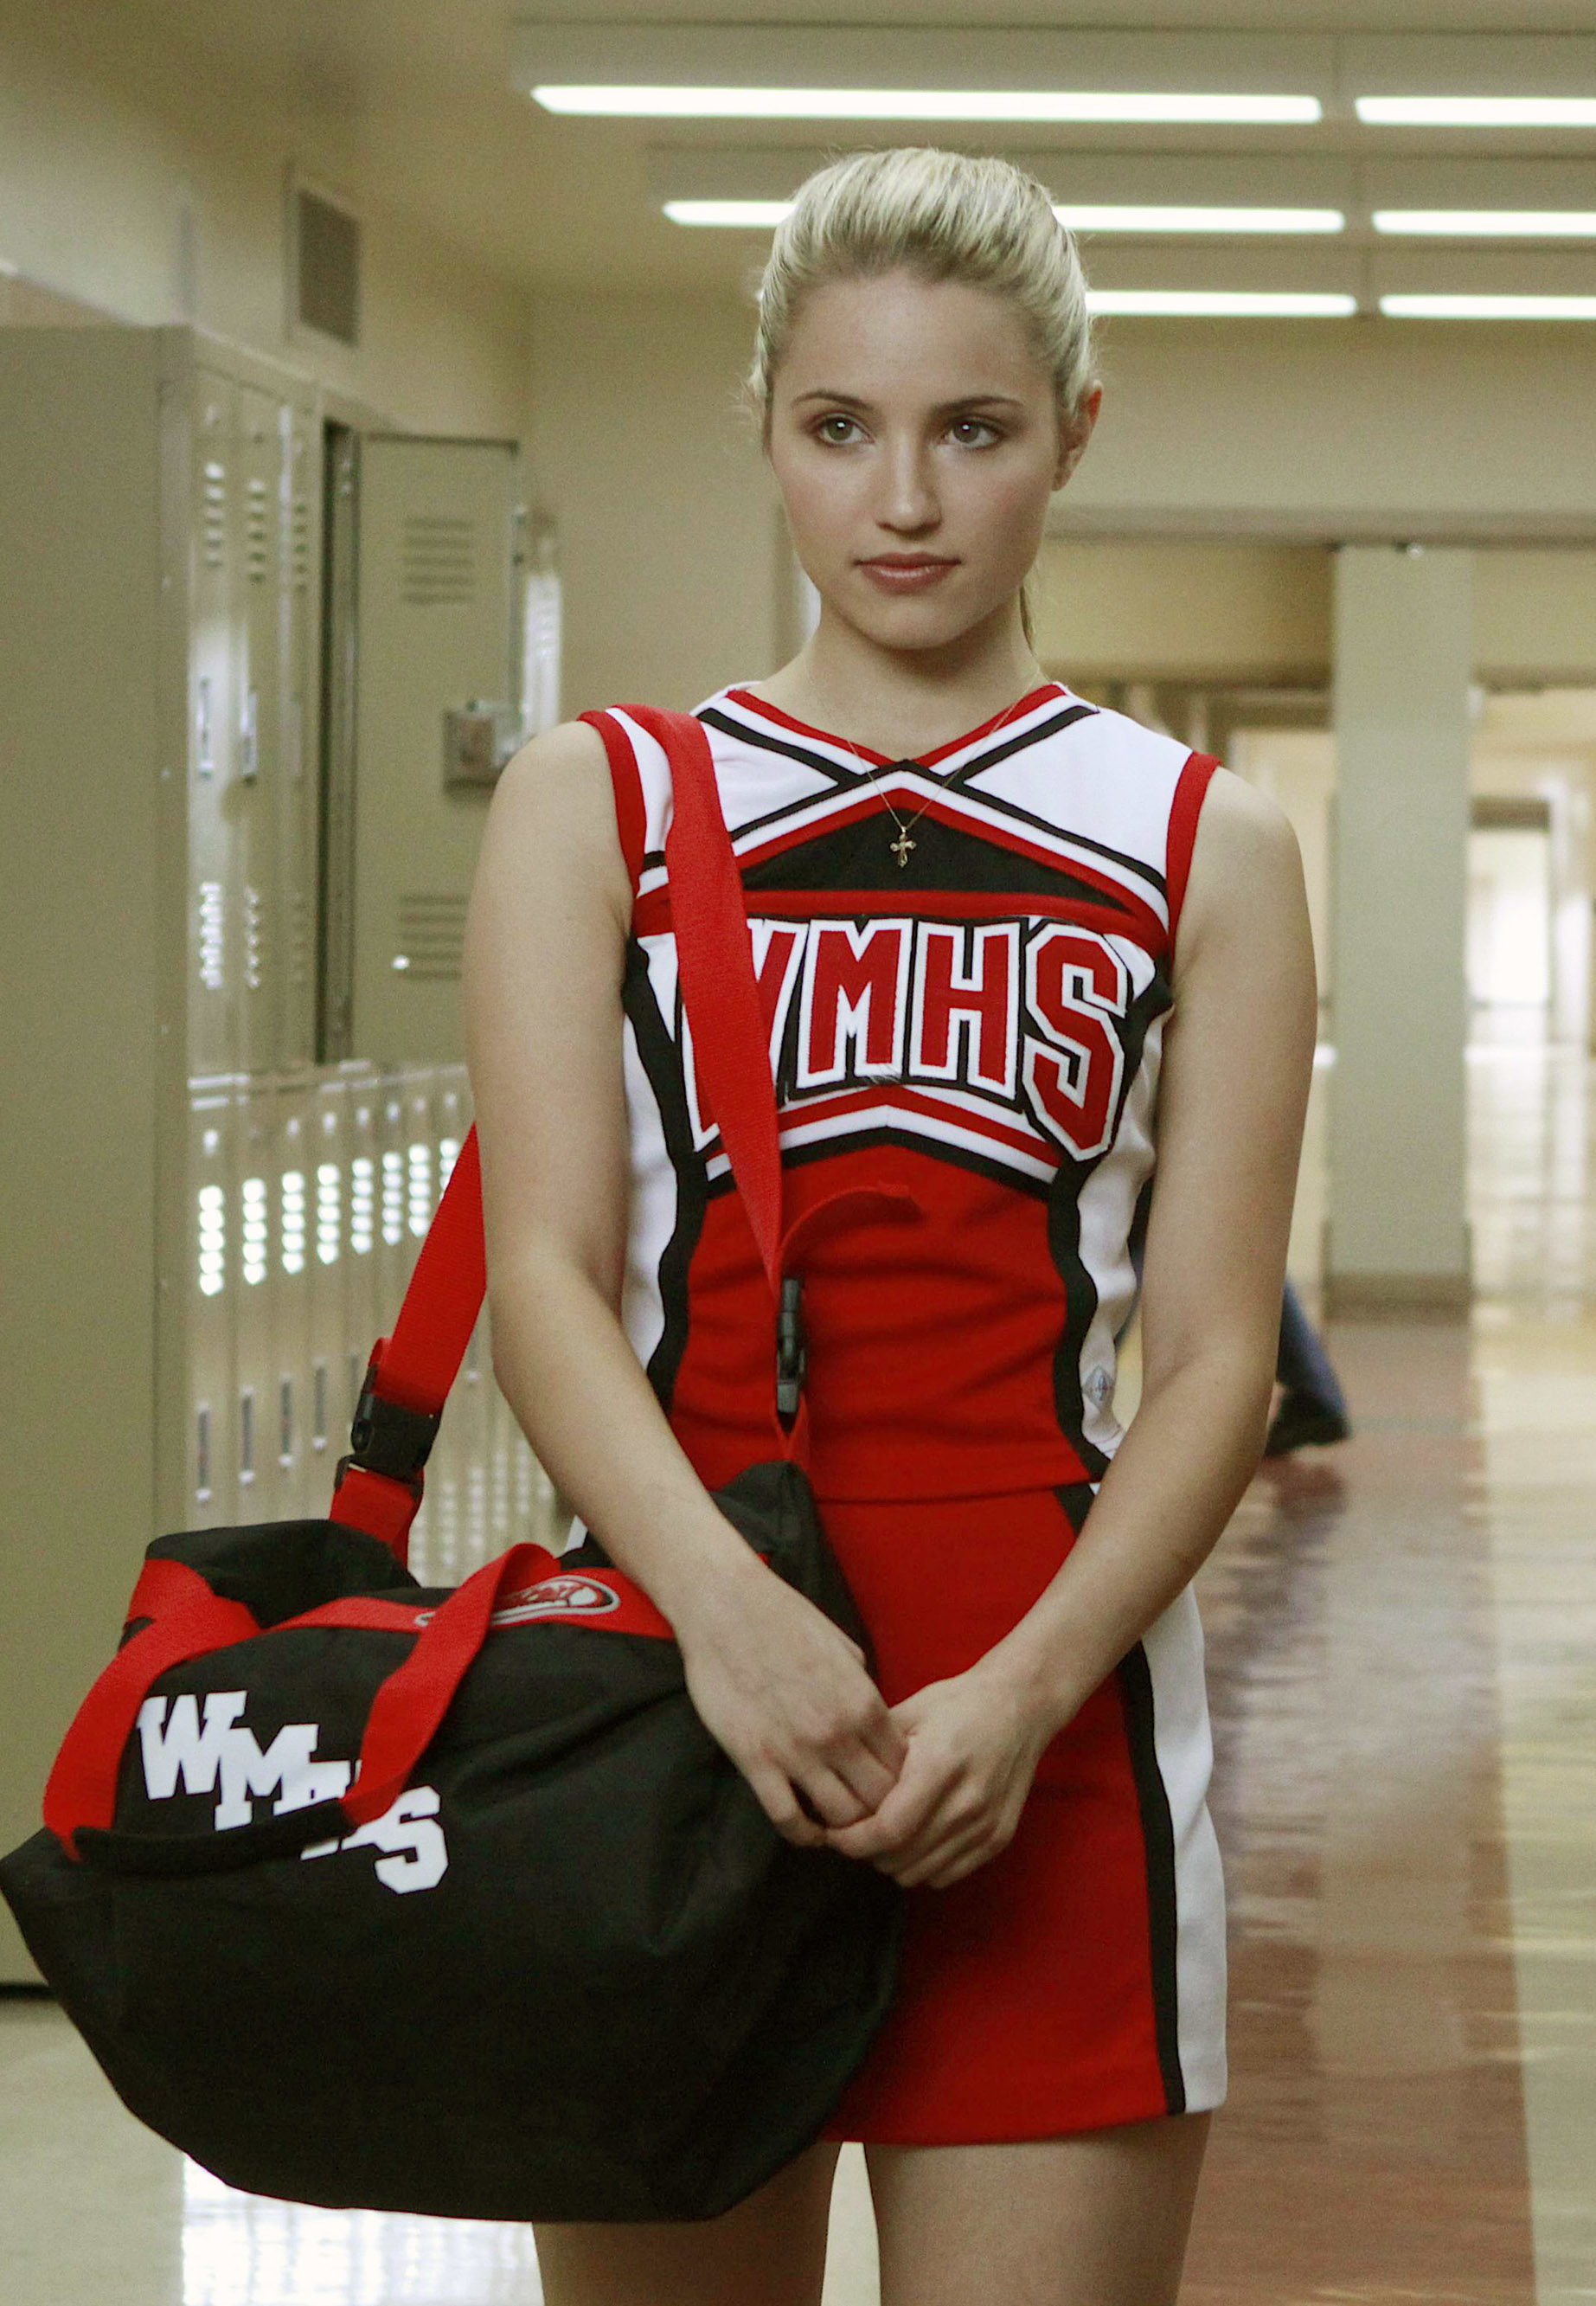 Quinn Fabray from Glee in a cheerleader uniform holding a gym bag, standing in a school hallway